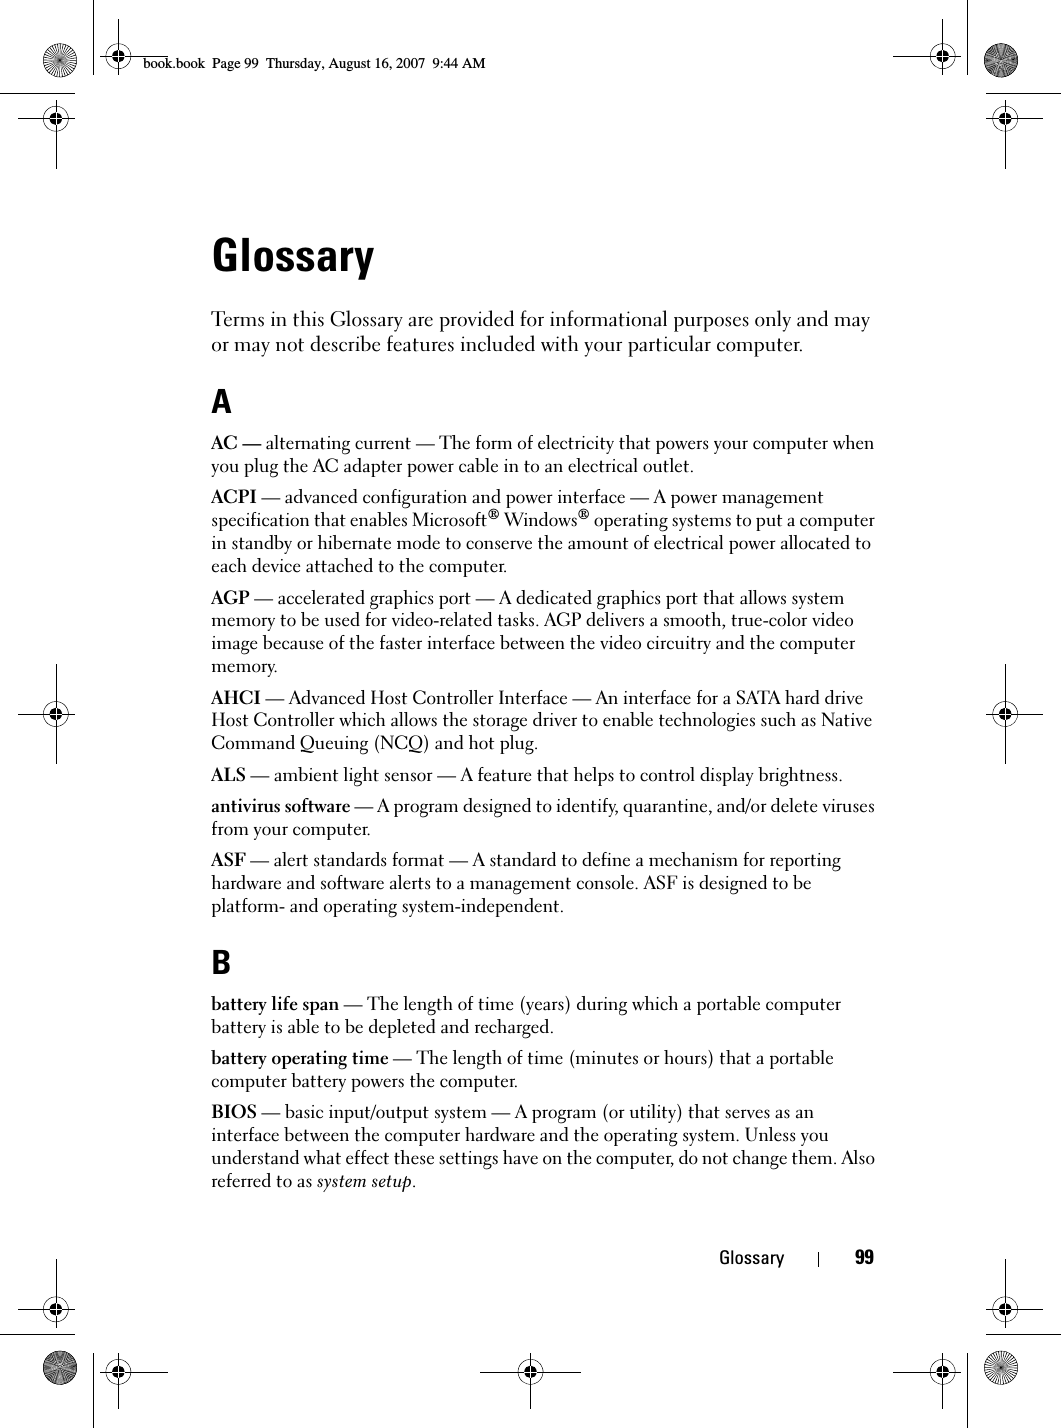 Glossary 99GlossaryTerms in this Glossary are provided for informational purposes only and may or may not describe features included with your particular computer.AAC — alternating current — The form of electricity that powers your computer when you plug the AC adapter power cable in to an electrical outlet.ACPI — advanced configuration and power interface — A power management specification that enables Microsoft® Windows® operating systems to put a computer in standby or hibernate mode to conserve the amount of electrical power allocated to each device attached to the computer.AGP — accelerated graphics port — A dedicated graphics port that allows system memory to be used for video-related tasks. AGP delivers a smooth, true-color video image because of the faster interface between the video circuitry and the computer memory.AHCI — Advanced Host Controller Interface — An interface for a SATA hard drive Host Controller which allows the storage driver to enable technologies such as Native Command Queuing (NCQ) and hot plug.ALS — ambient light sensor — A feature that helps to control display brightness.antivirus software — A program designed to identify, quarantine, and/or delete viruses from your computer.ASF — alert standards format — A standard to define a mechanism for reporting hardware and software alerts to a management console. ASF is designed to be platform- and operating system-independent.Bbattery life span — The length of time (years) during which a portable computer battery is able to be depleted and recharged.battery operating time — The length of time (minutes or hours) that a portable computer battery powers the computer.BIOS — basic input/output system — A program (or utility) that serves as an interface between the computer hardware and the operating system. Unless you understand what effect these settings have on the computer, do not change them. Also referred to as system setup.book.book  Page 99  Thursday, August 16, 2007  9:44 AM